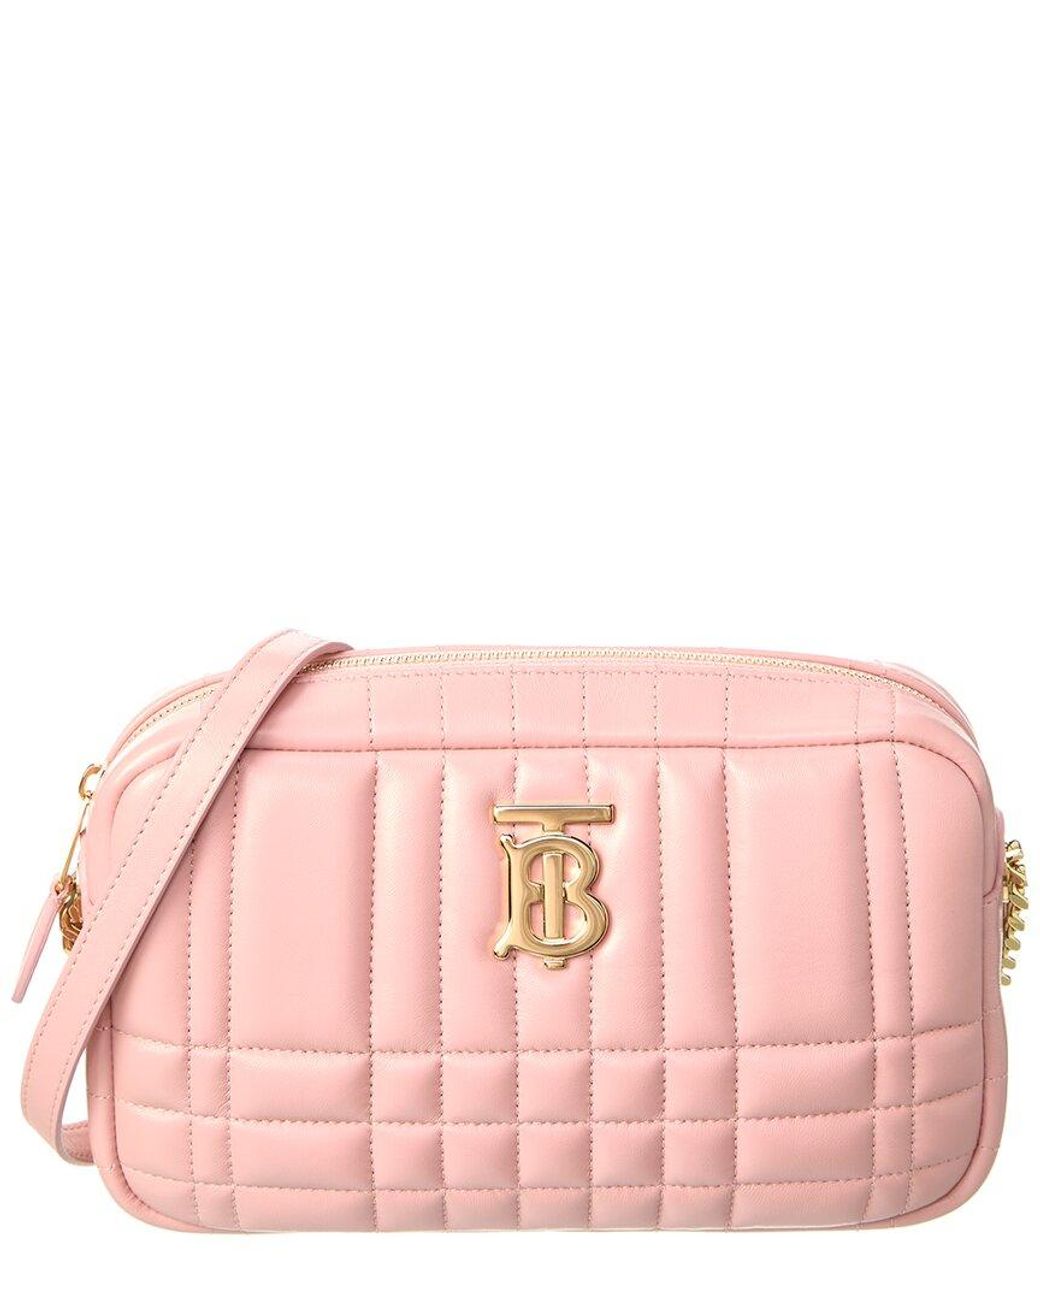 Burberry Lola Small Leather Camera Bag in Pink